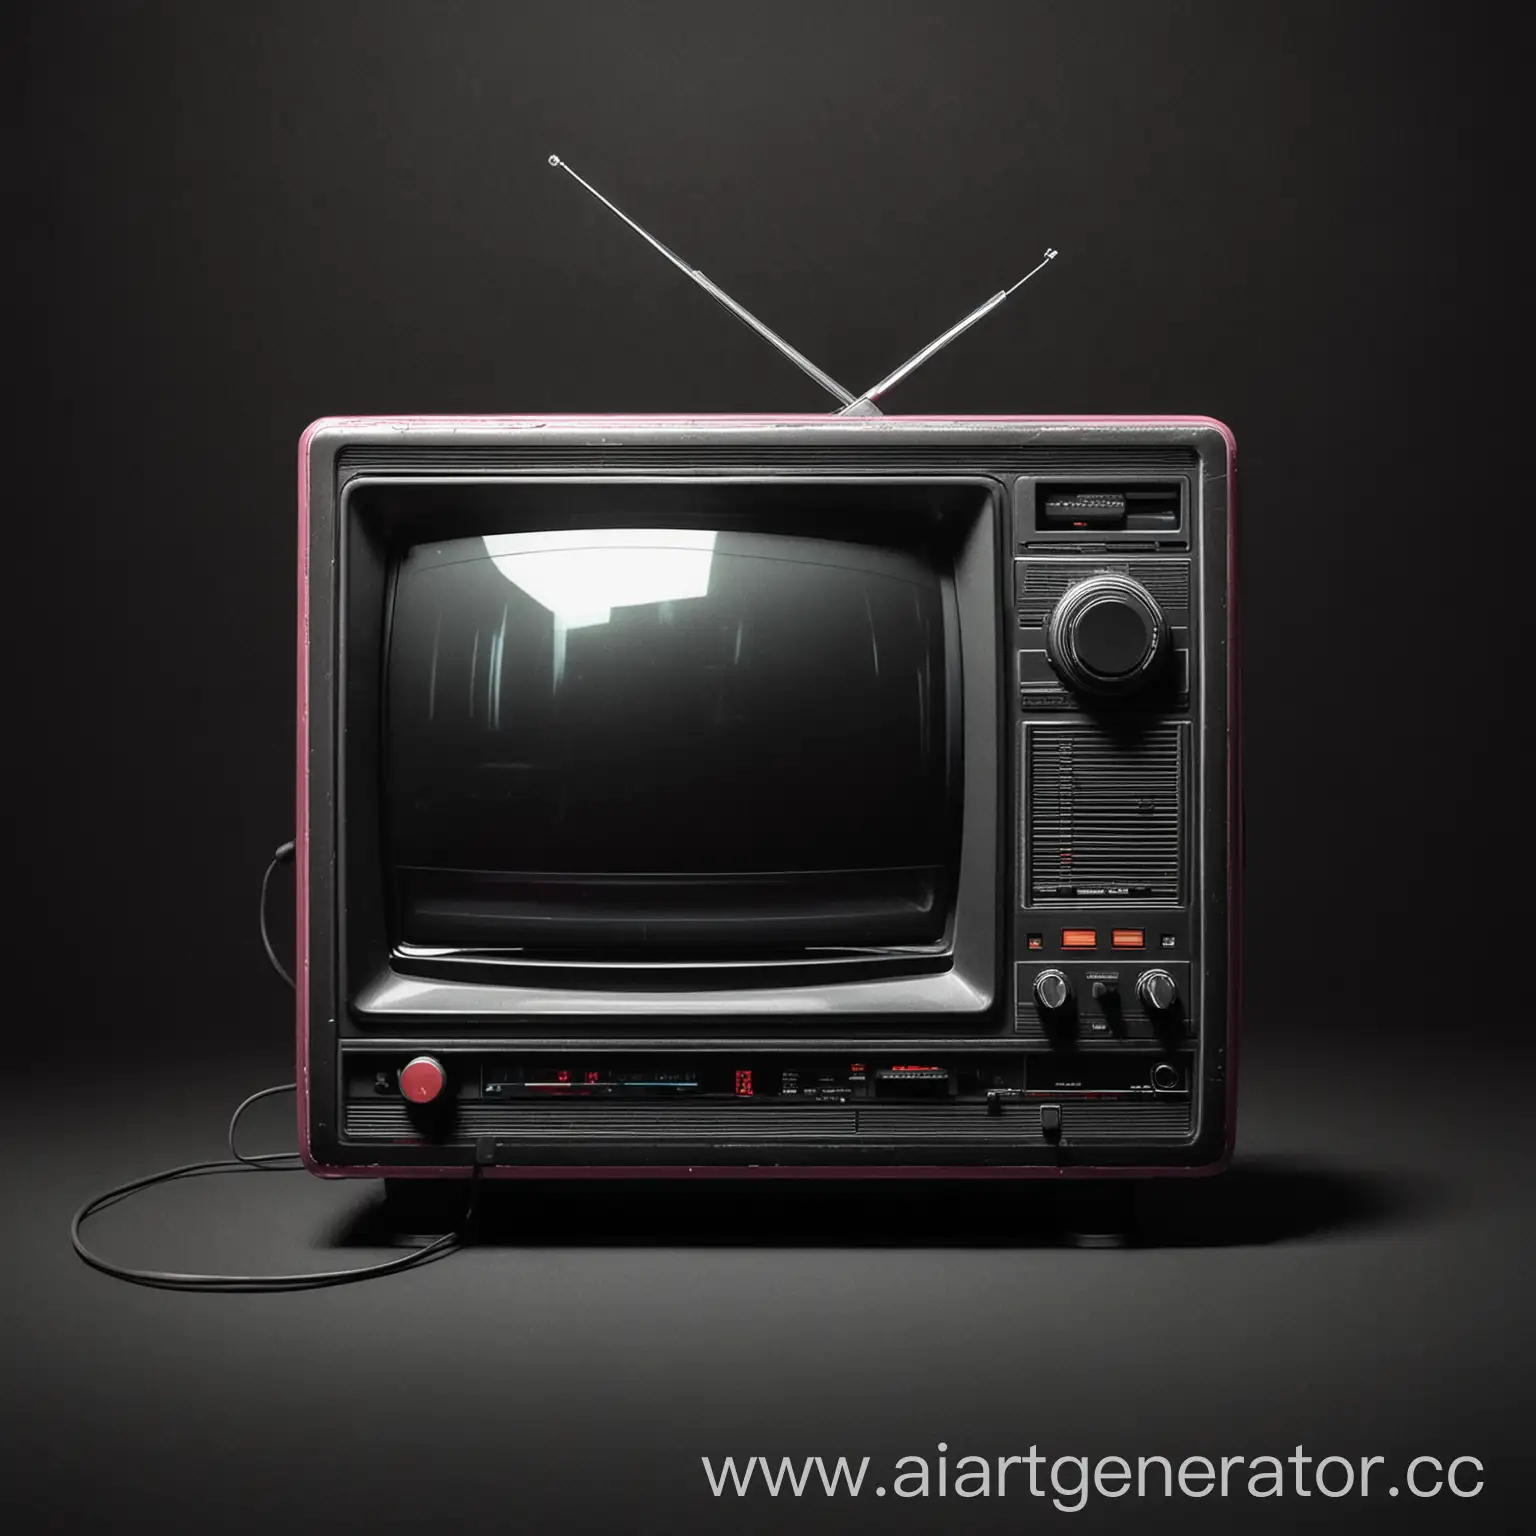 Retro-VHS-Style-TV-on-Tape-Recorder-with-Synthwave-Display